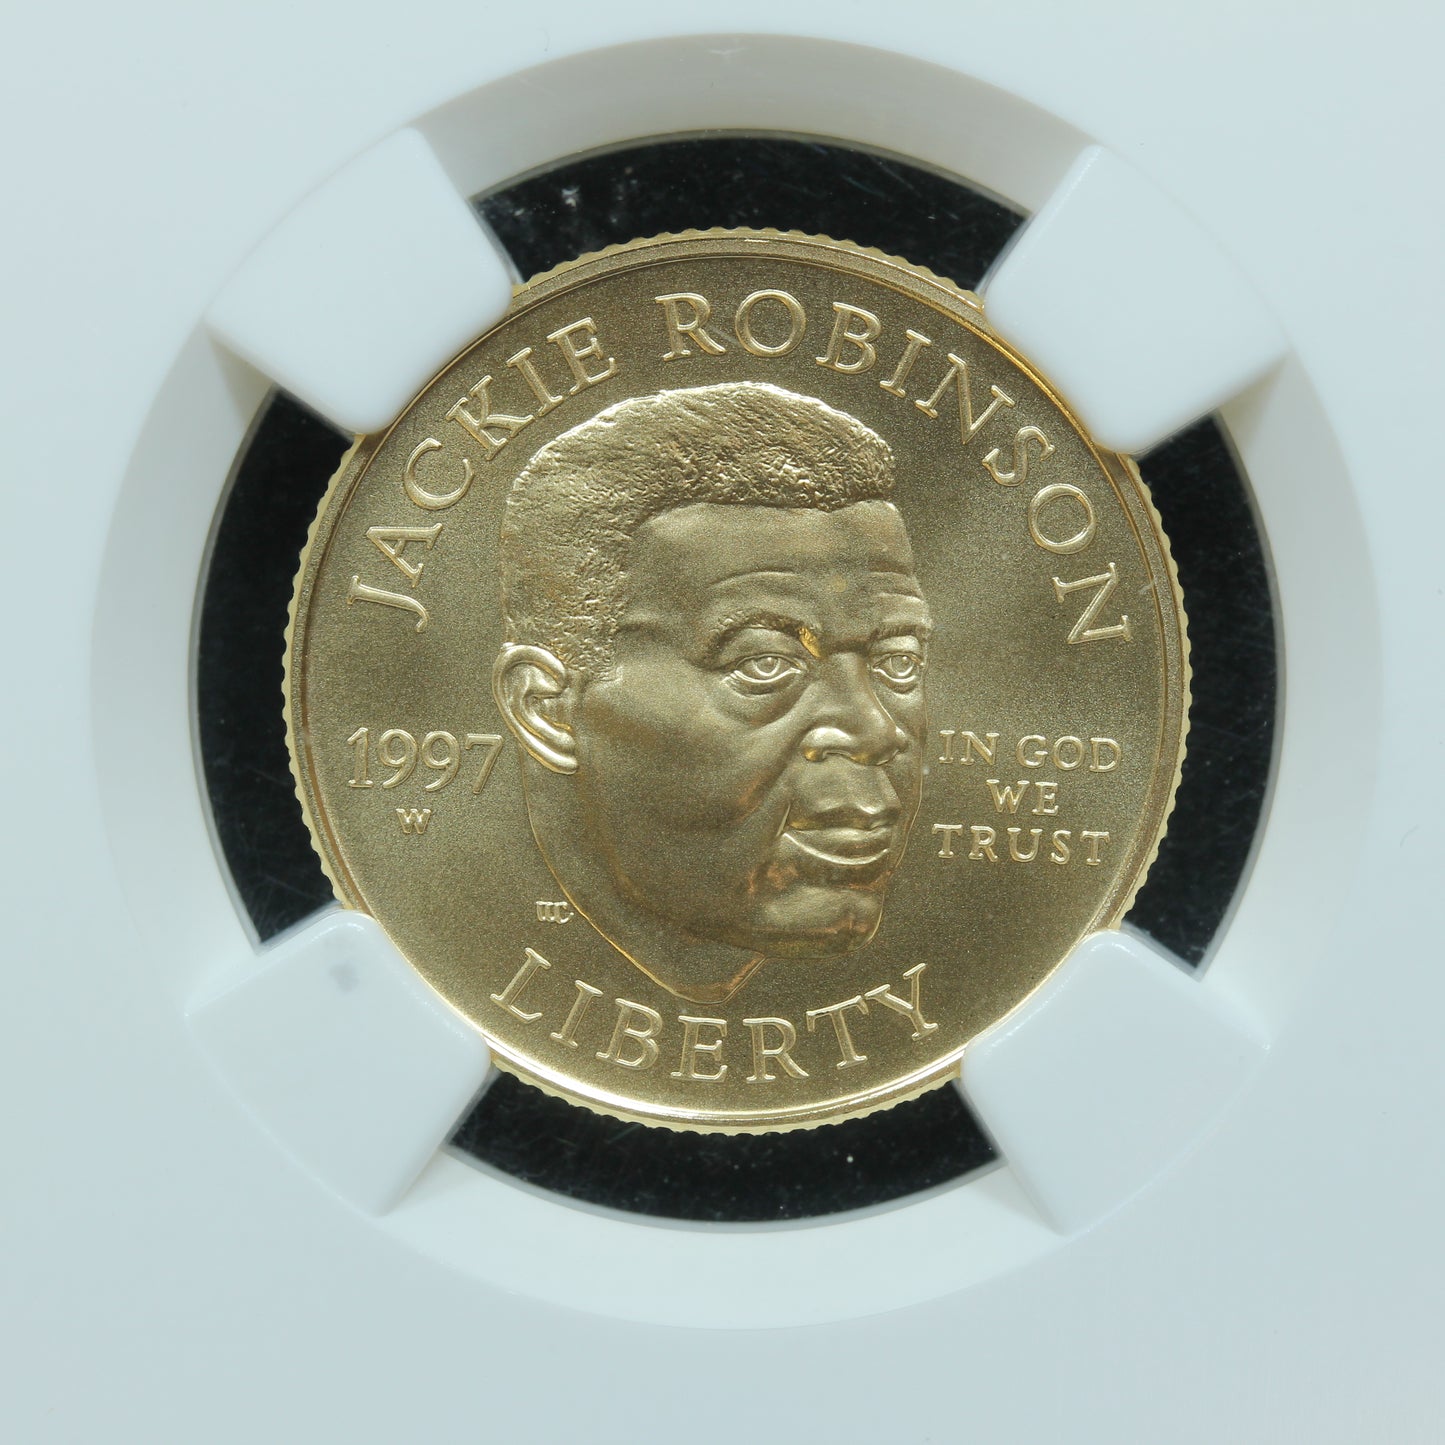 1997-W $5 Jackie Robinson US Gold Commemorative NGC MS 70